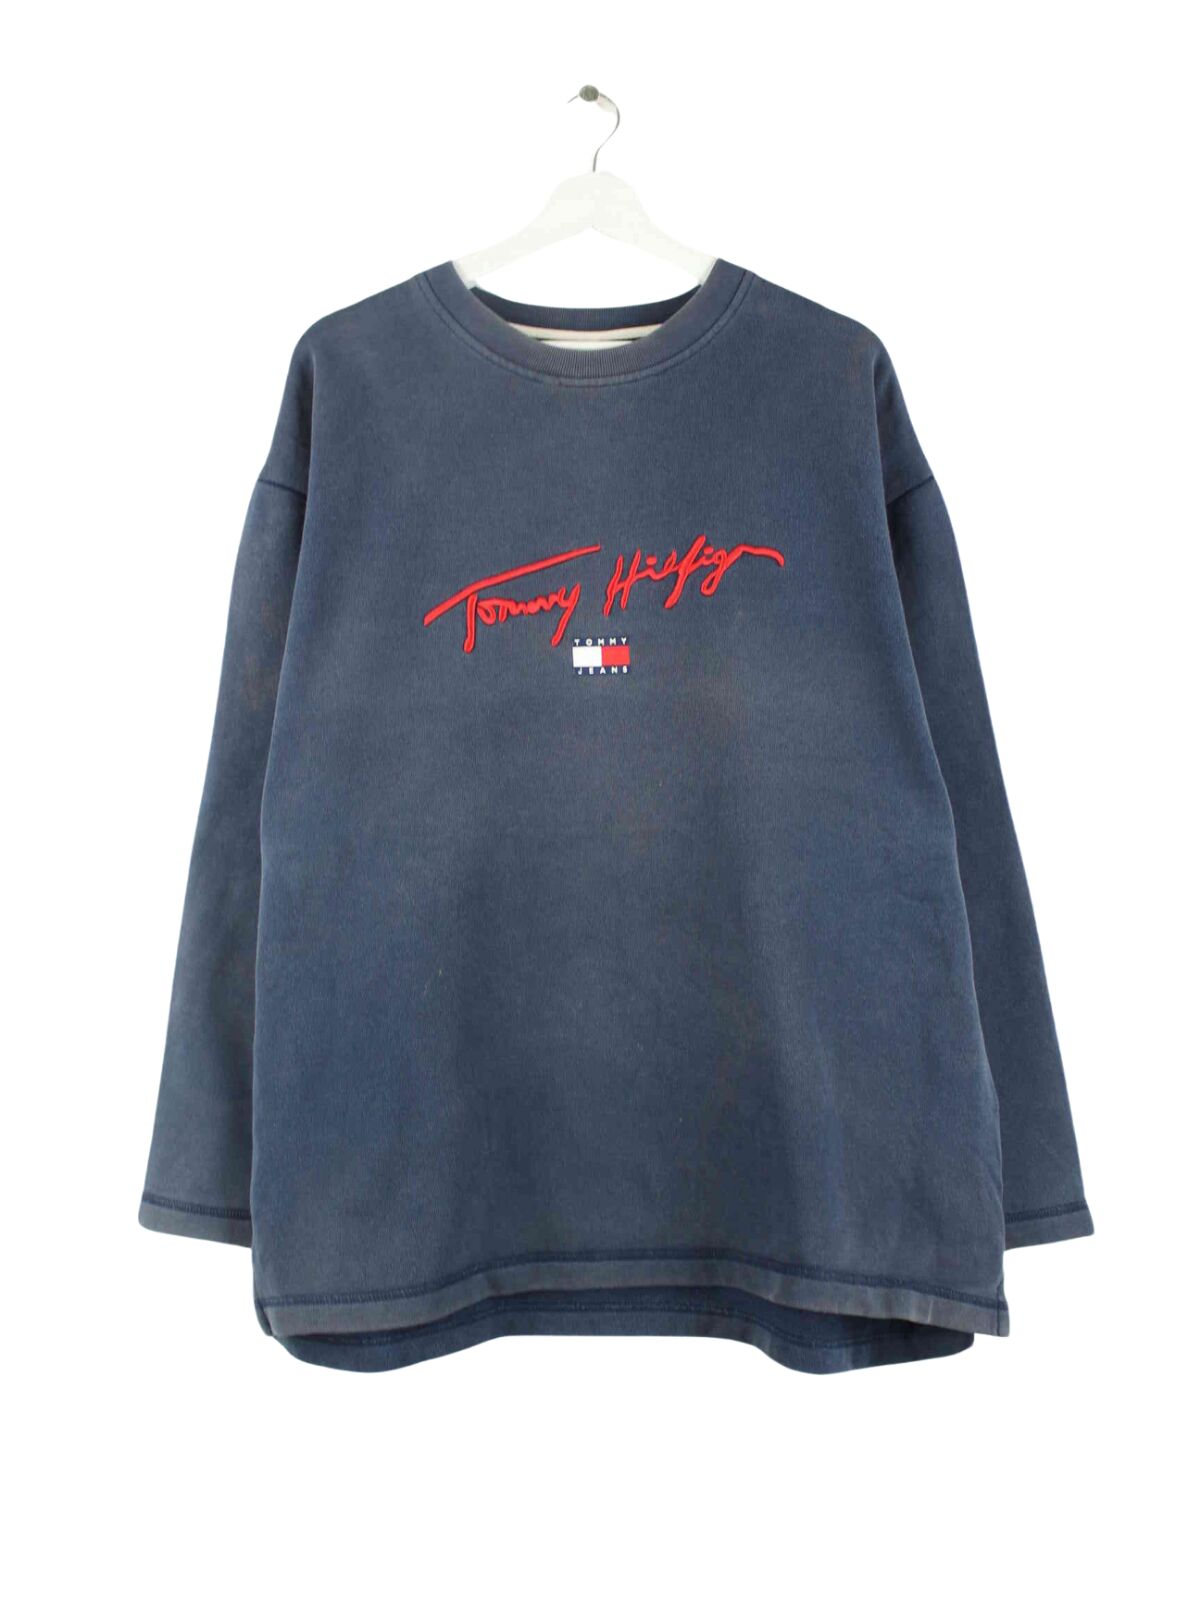 Tommy Hilfiger y2k Embroidered Sweater Blau M (front image)